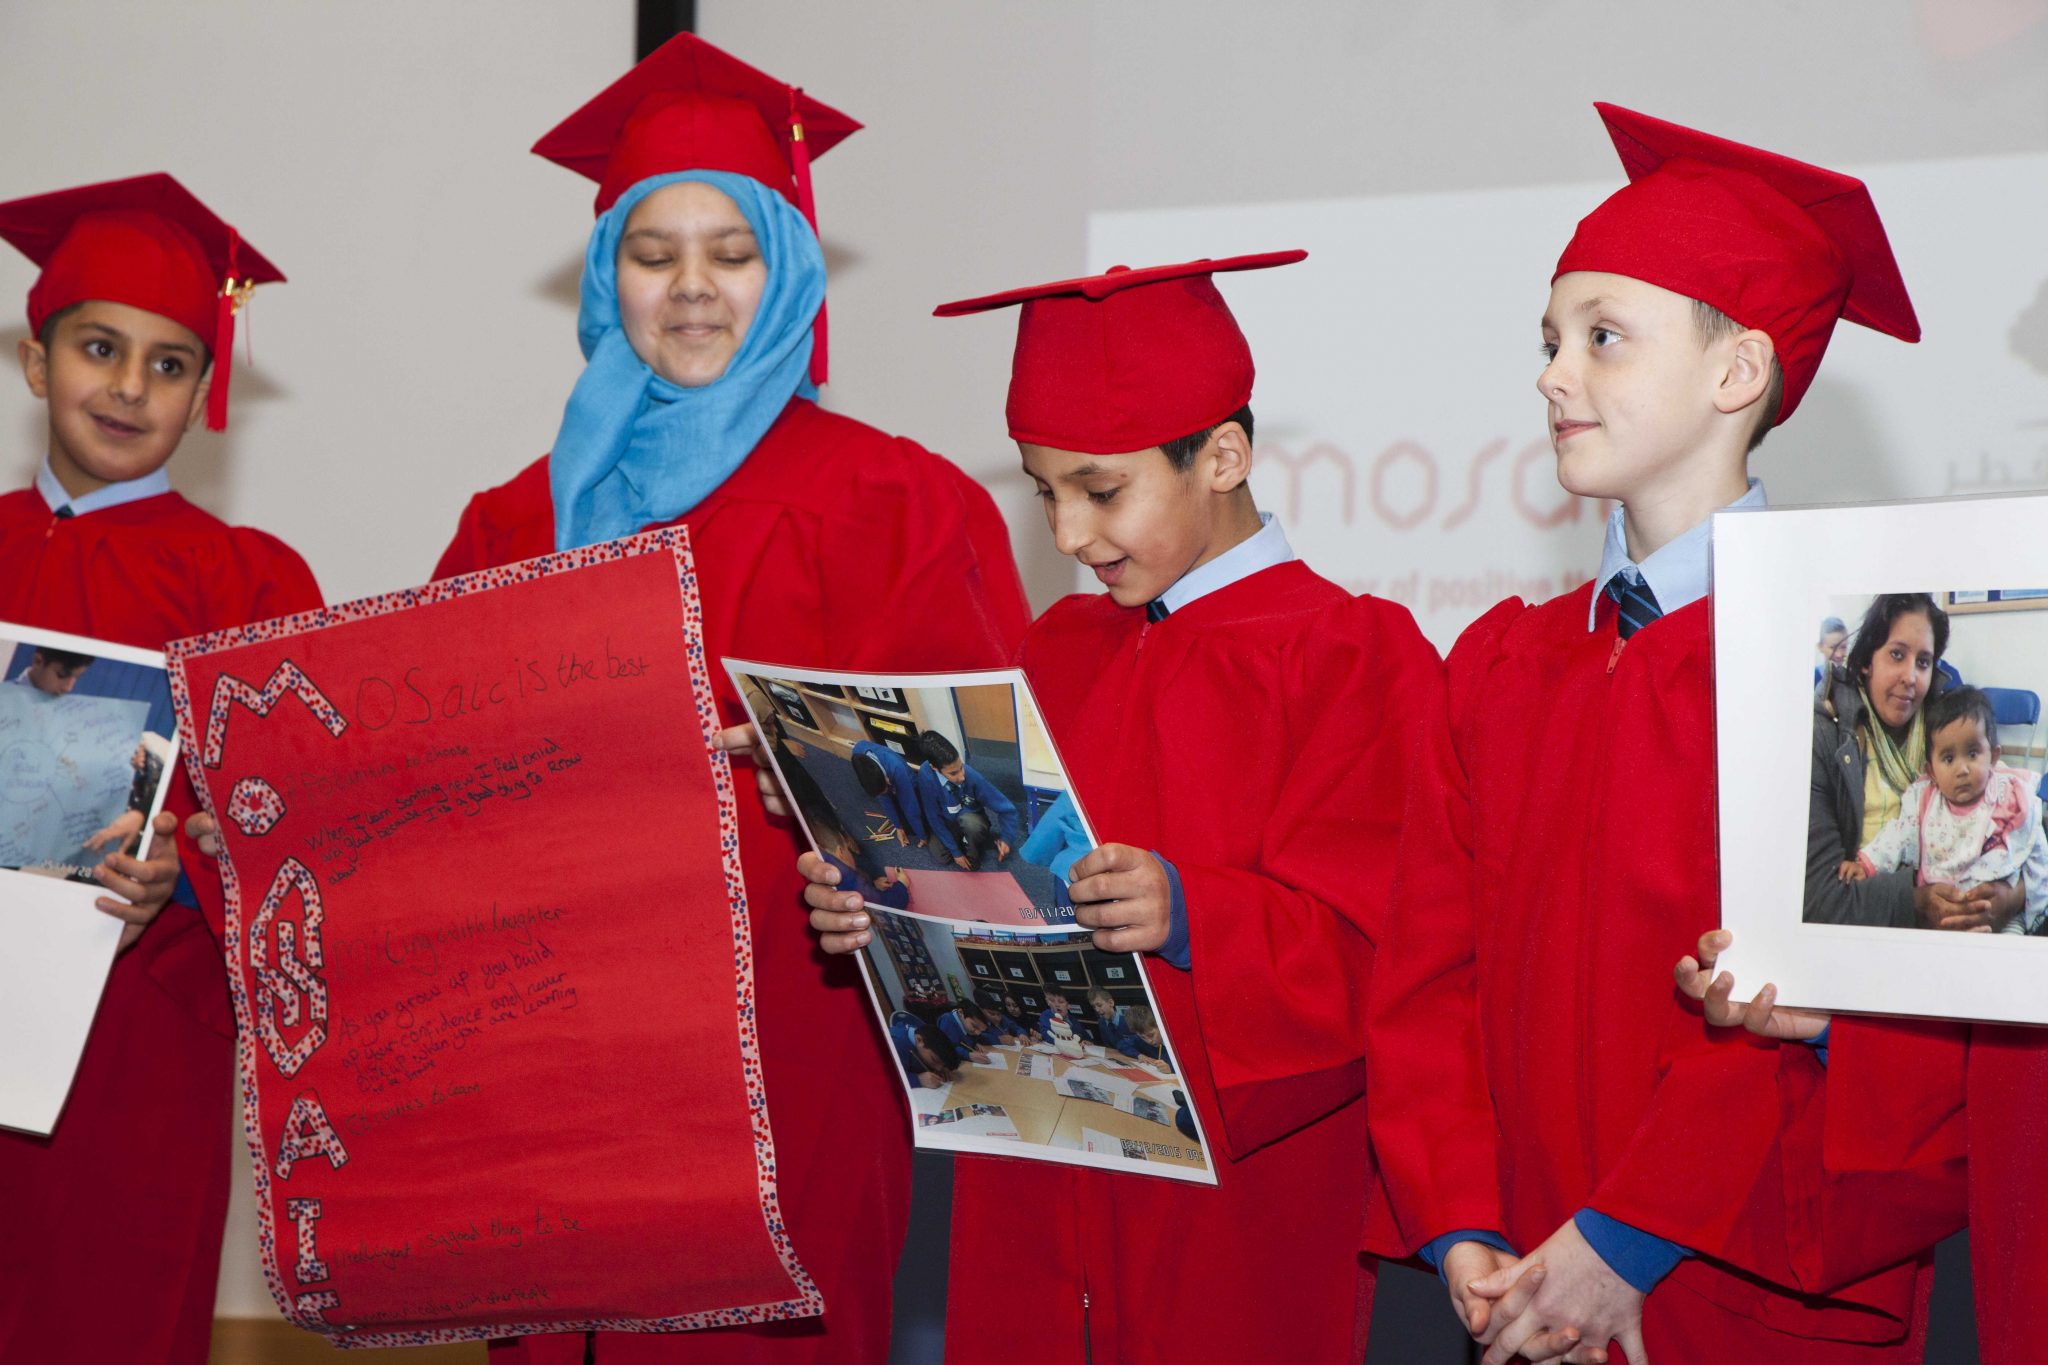 Mosaic Yks Graduation Ceremony 151215 Castleton Primary, Fagley Primary, St Matthew's C of E Primary and Talbot Primary Schools